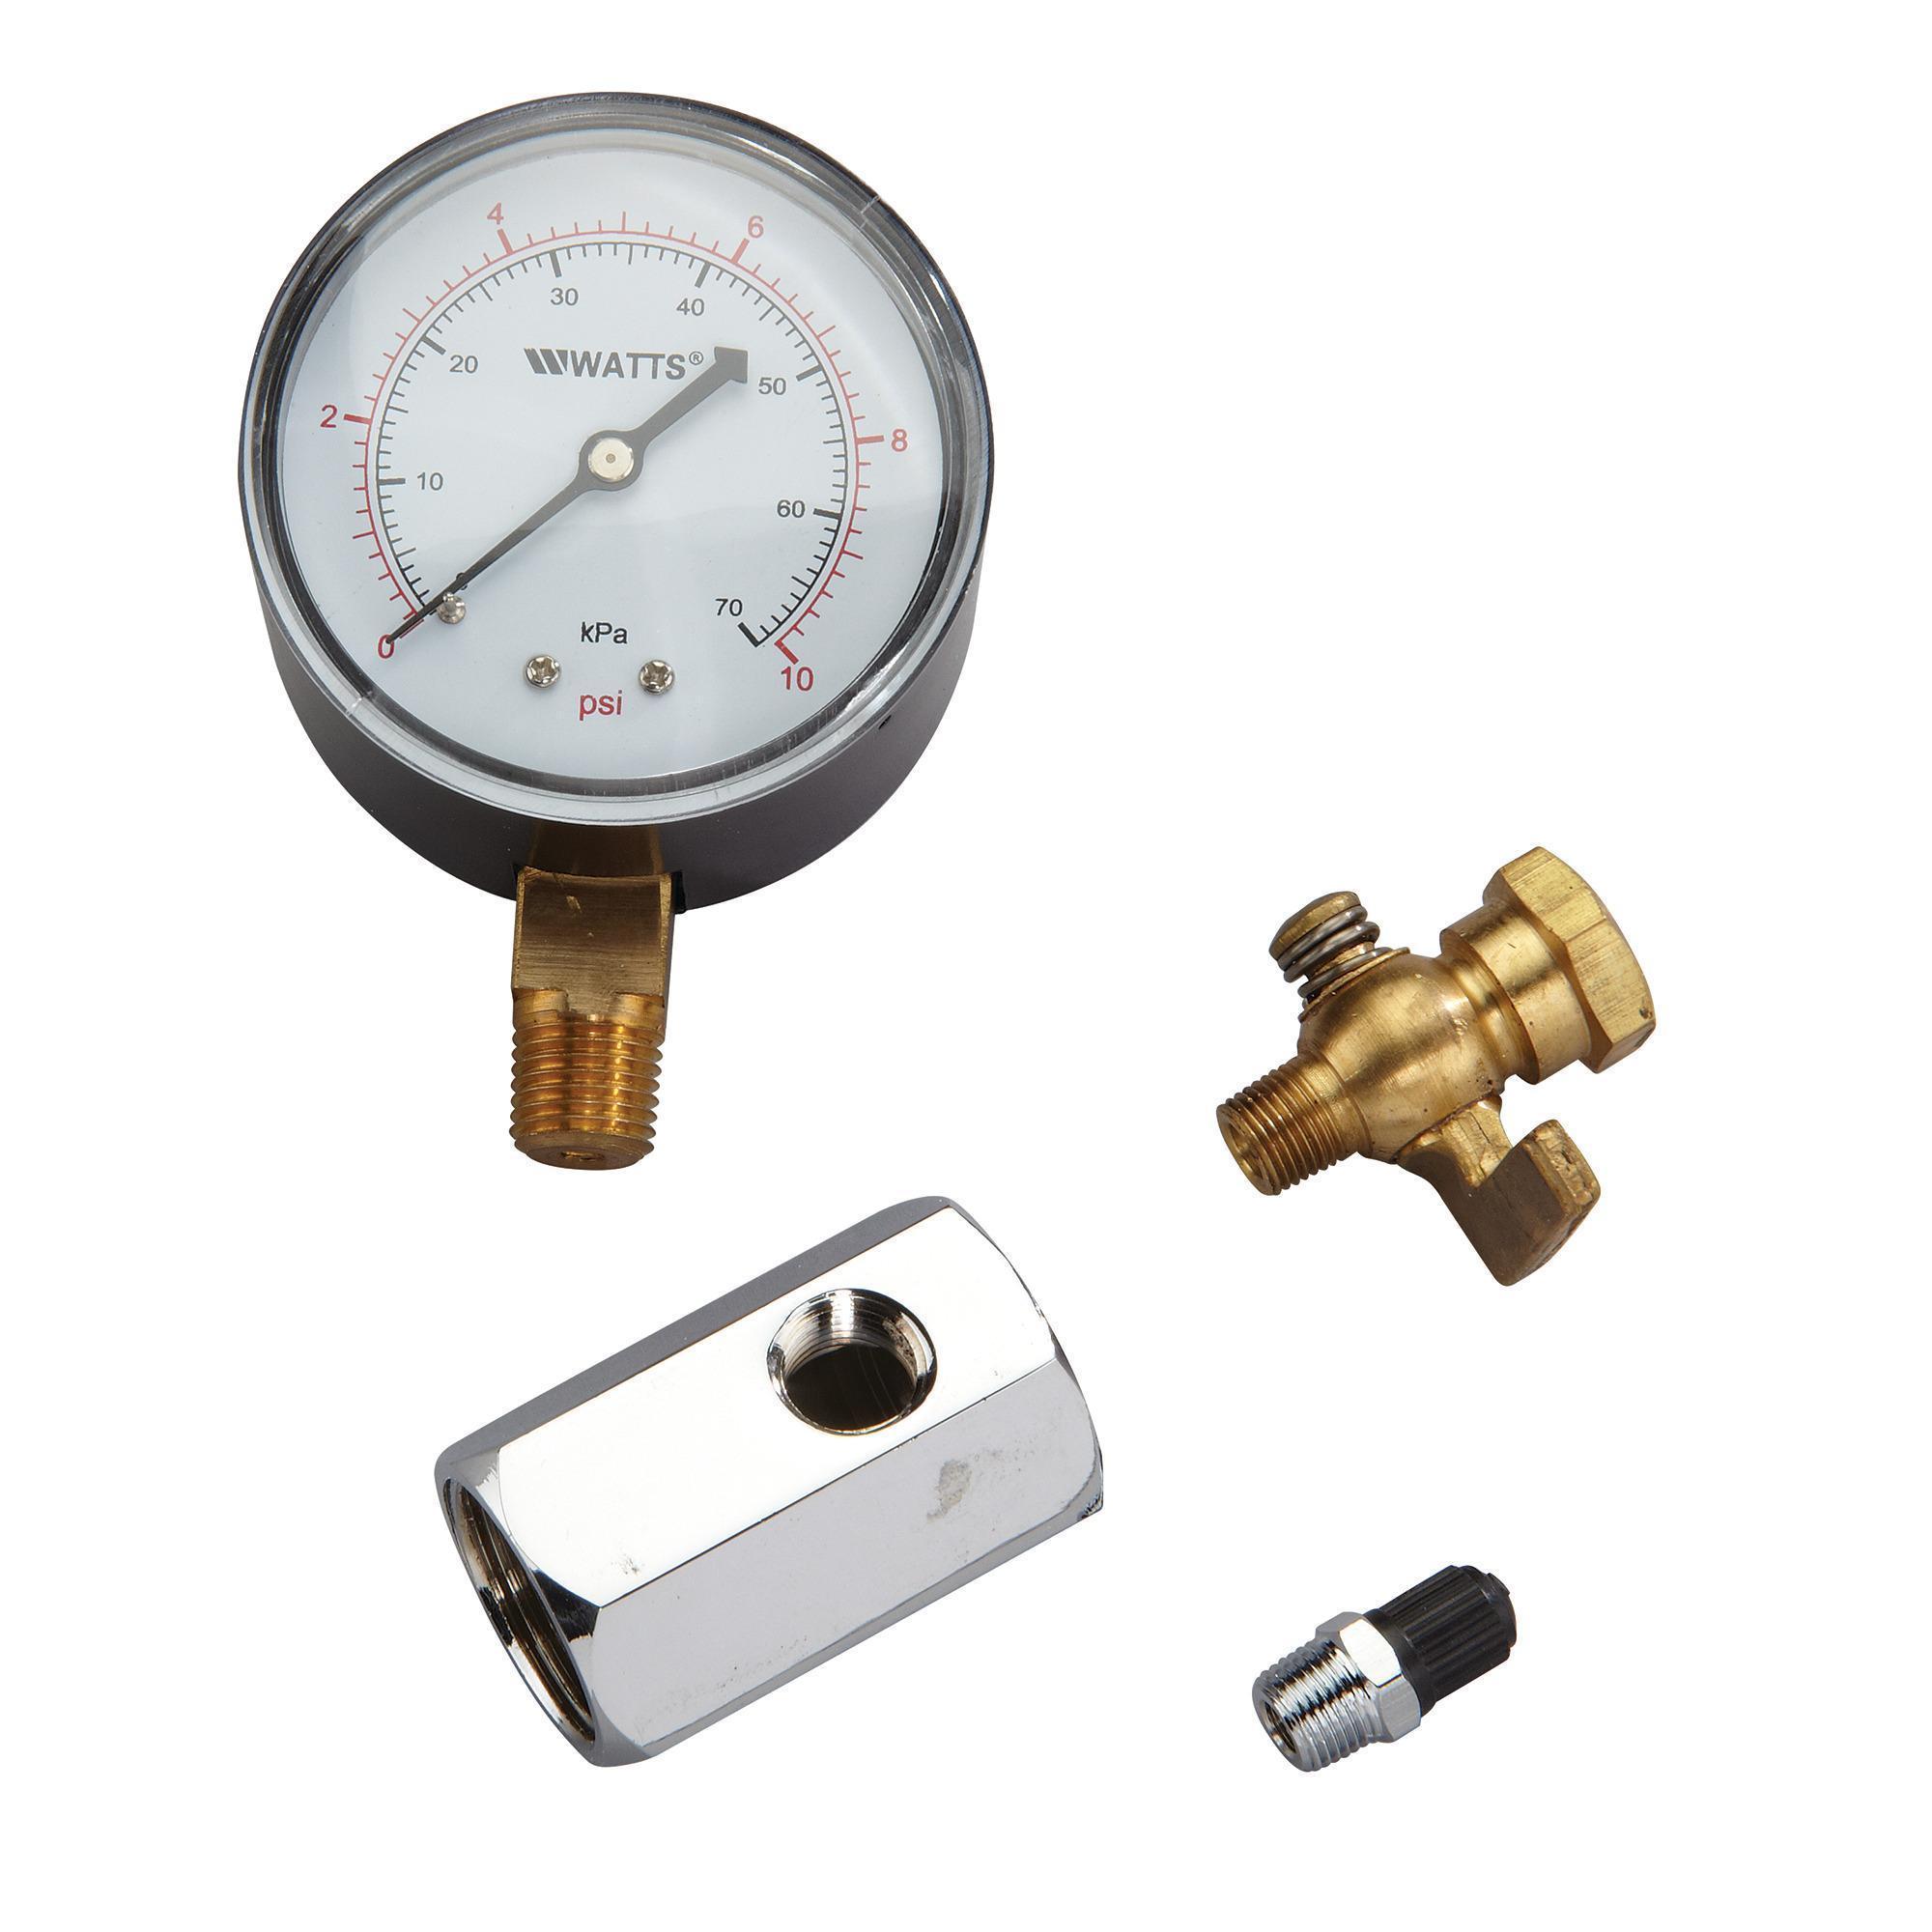 Aquifer Distribution | WATTS 0069785 Dual Scale Air Test Gauge Assembly, 0  to 10 psi/69 kPa Pressure, 3/4 in FNPT Connection, 2-1/2 in Dia Dial, 0.02  % Accuracy